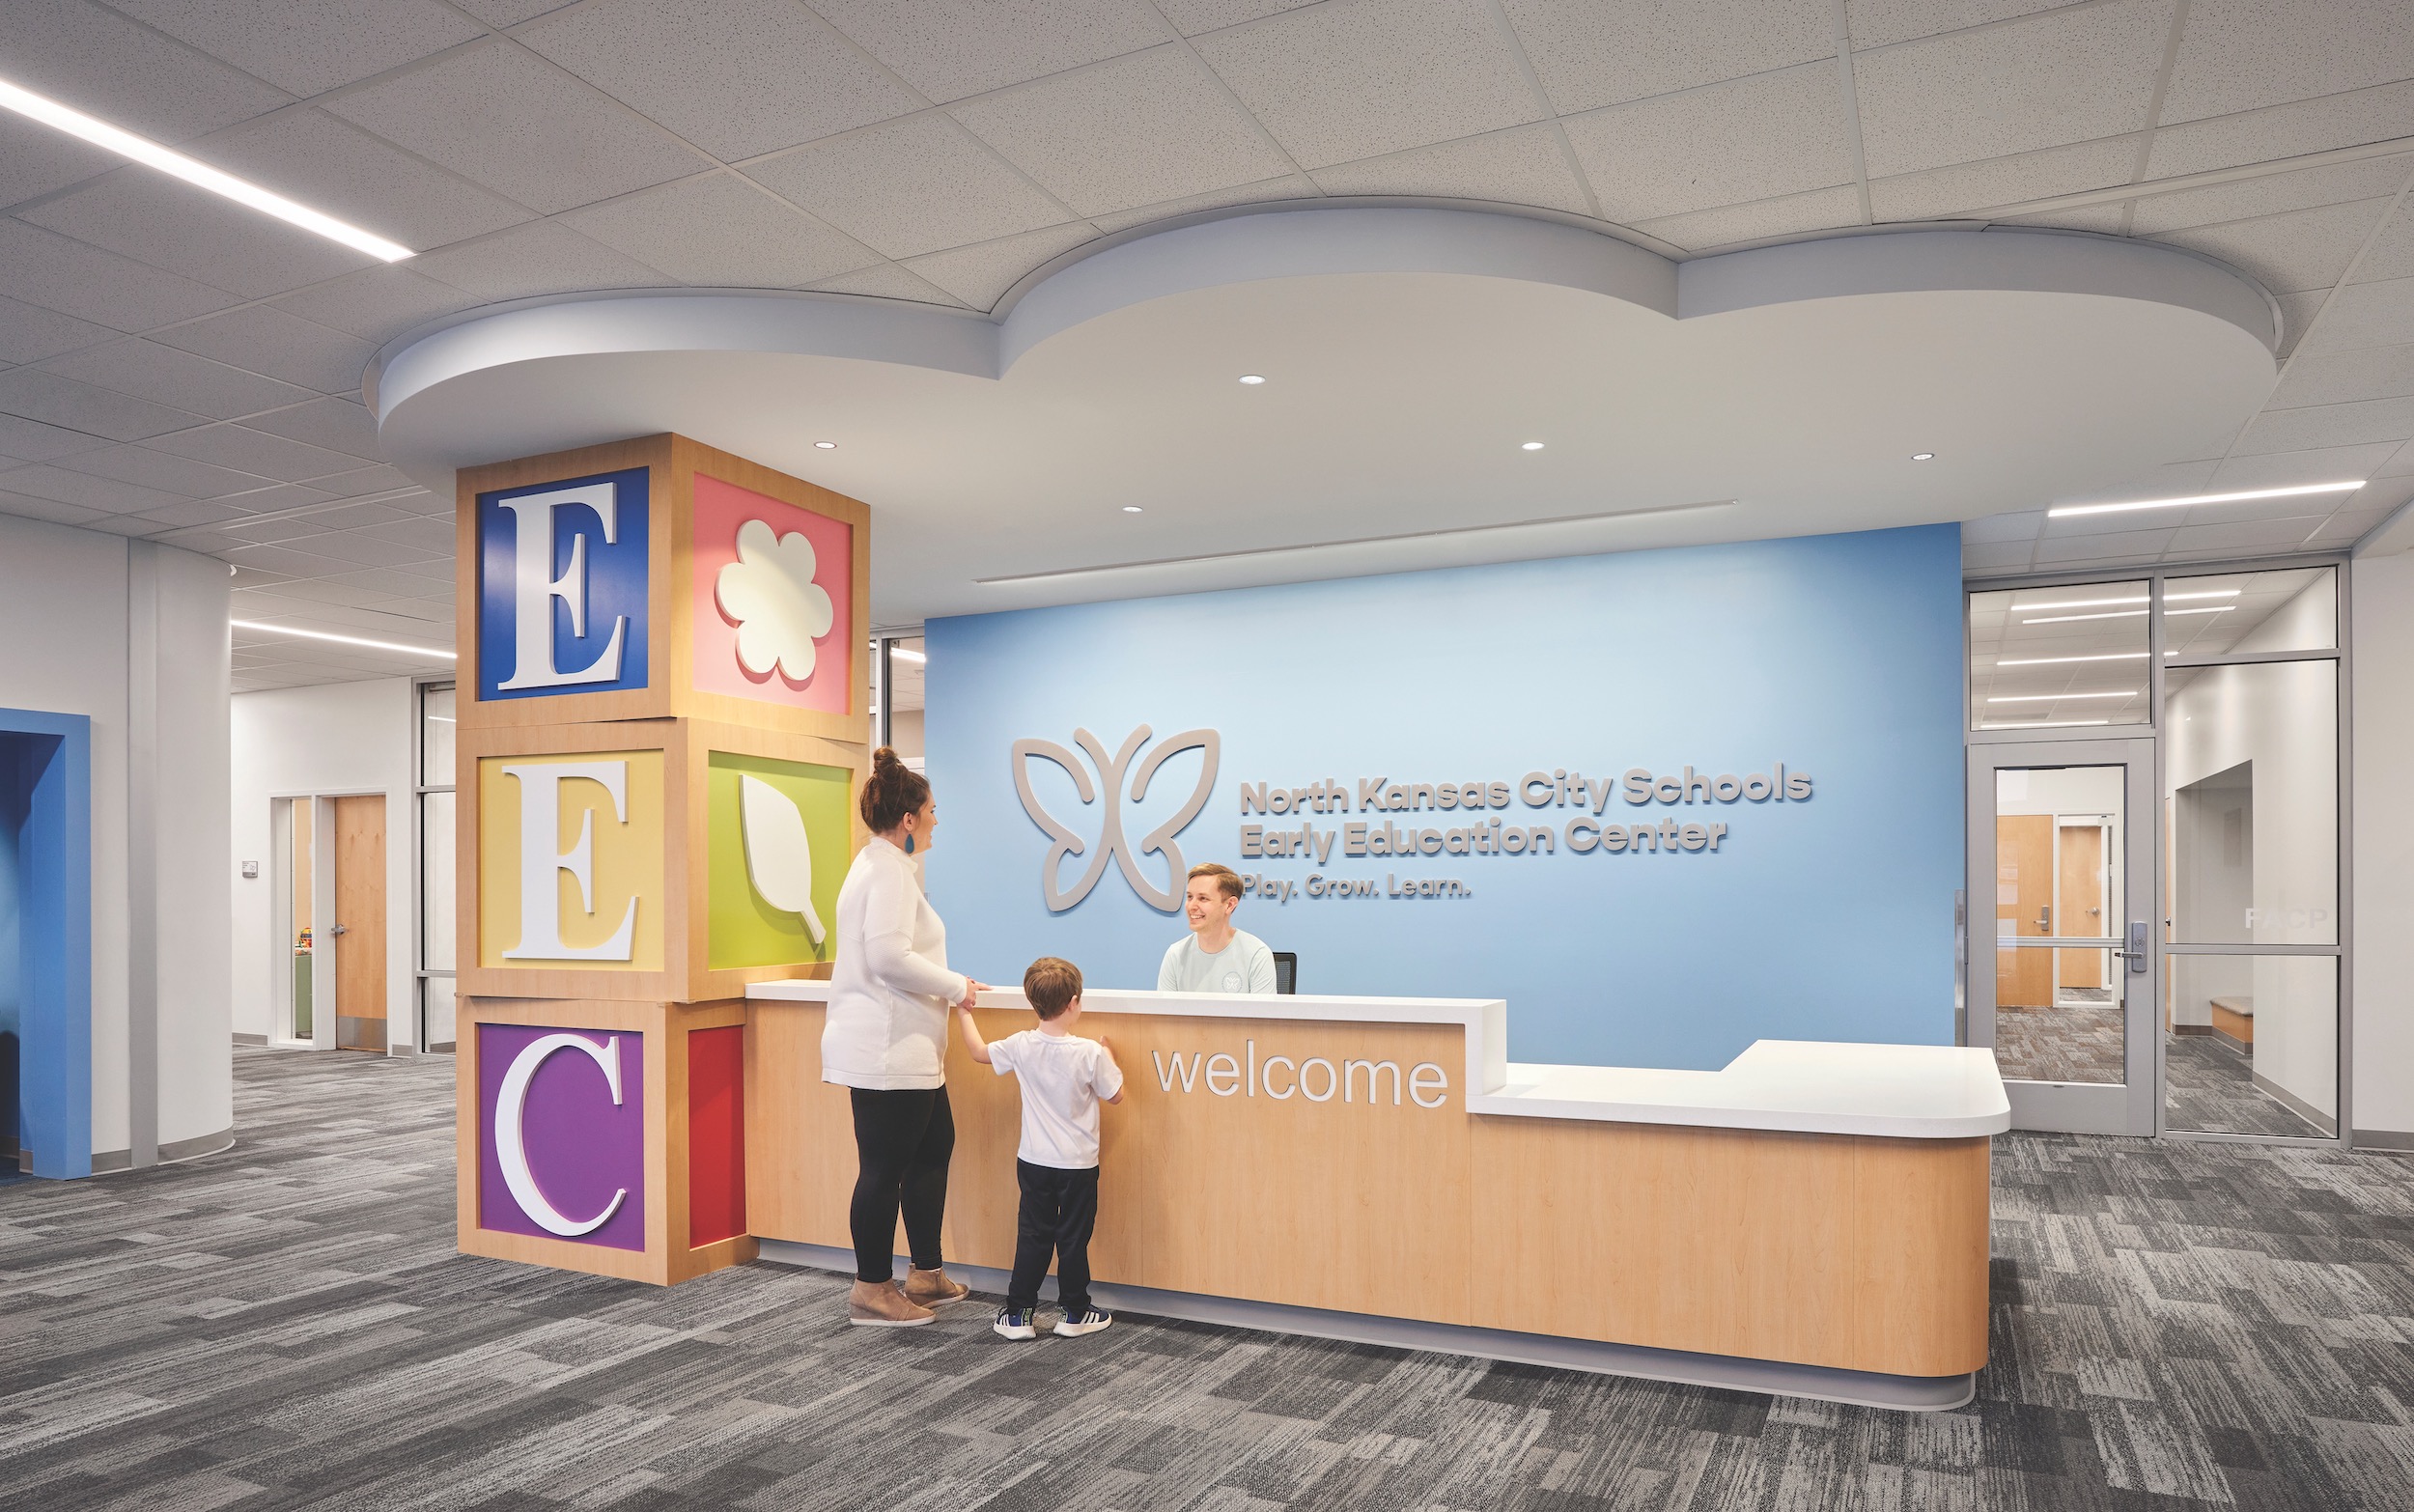 The 112,000-sf North Kansas City Schools’ Early Education Center, in Gladstone, Mo. Photo courtesy Michael Robinson, DLR Group